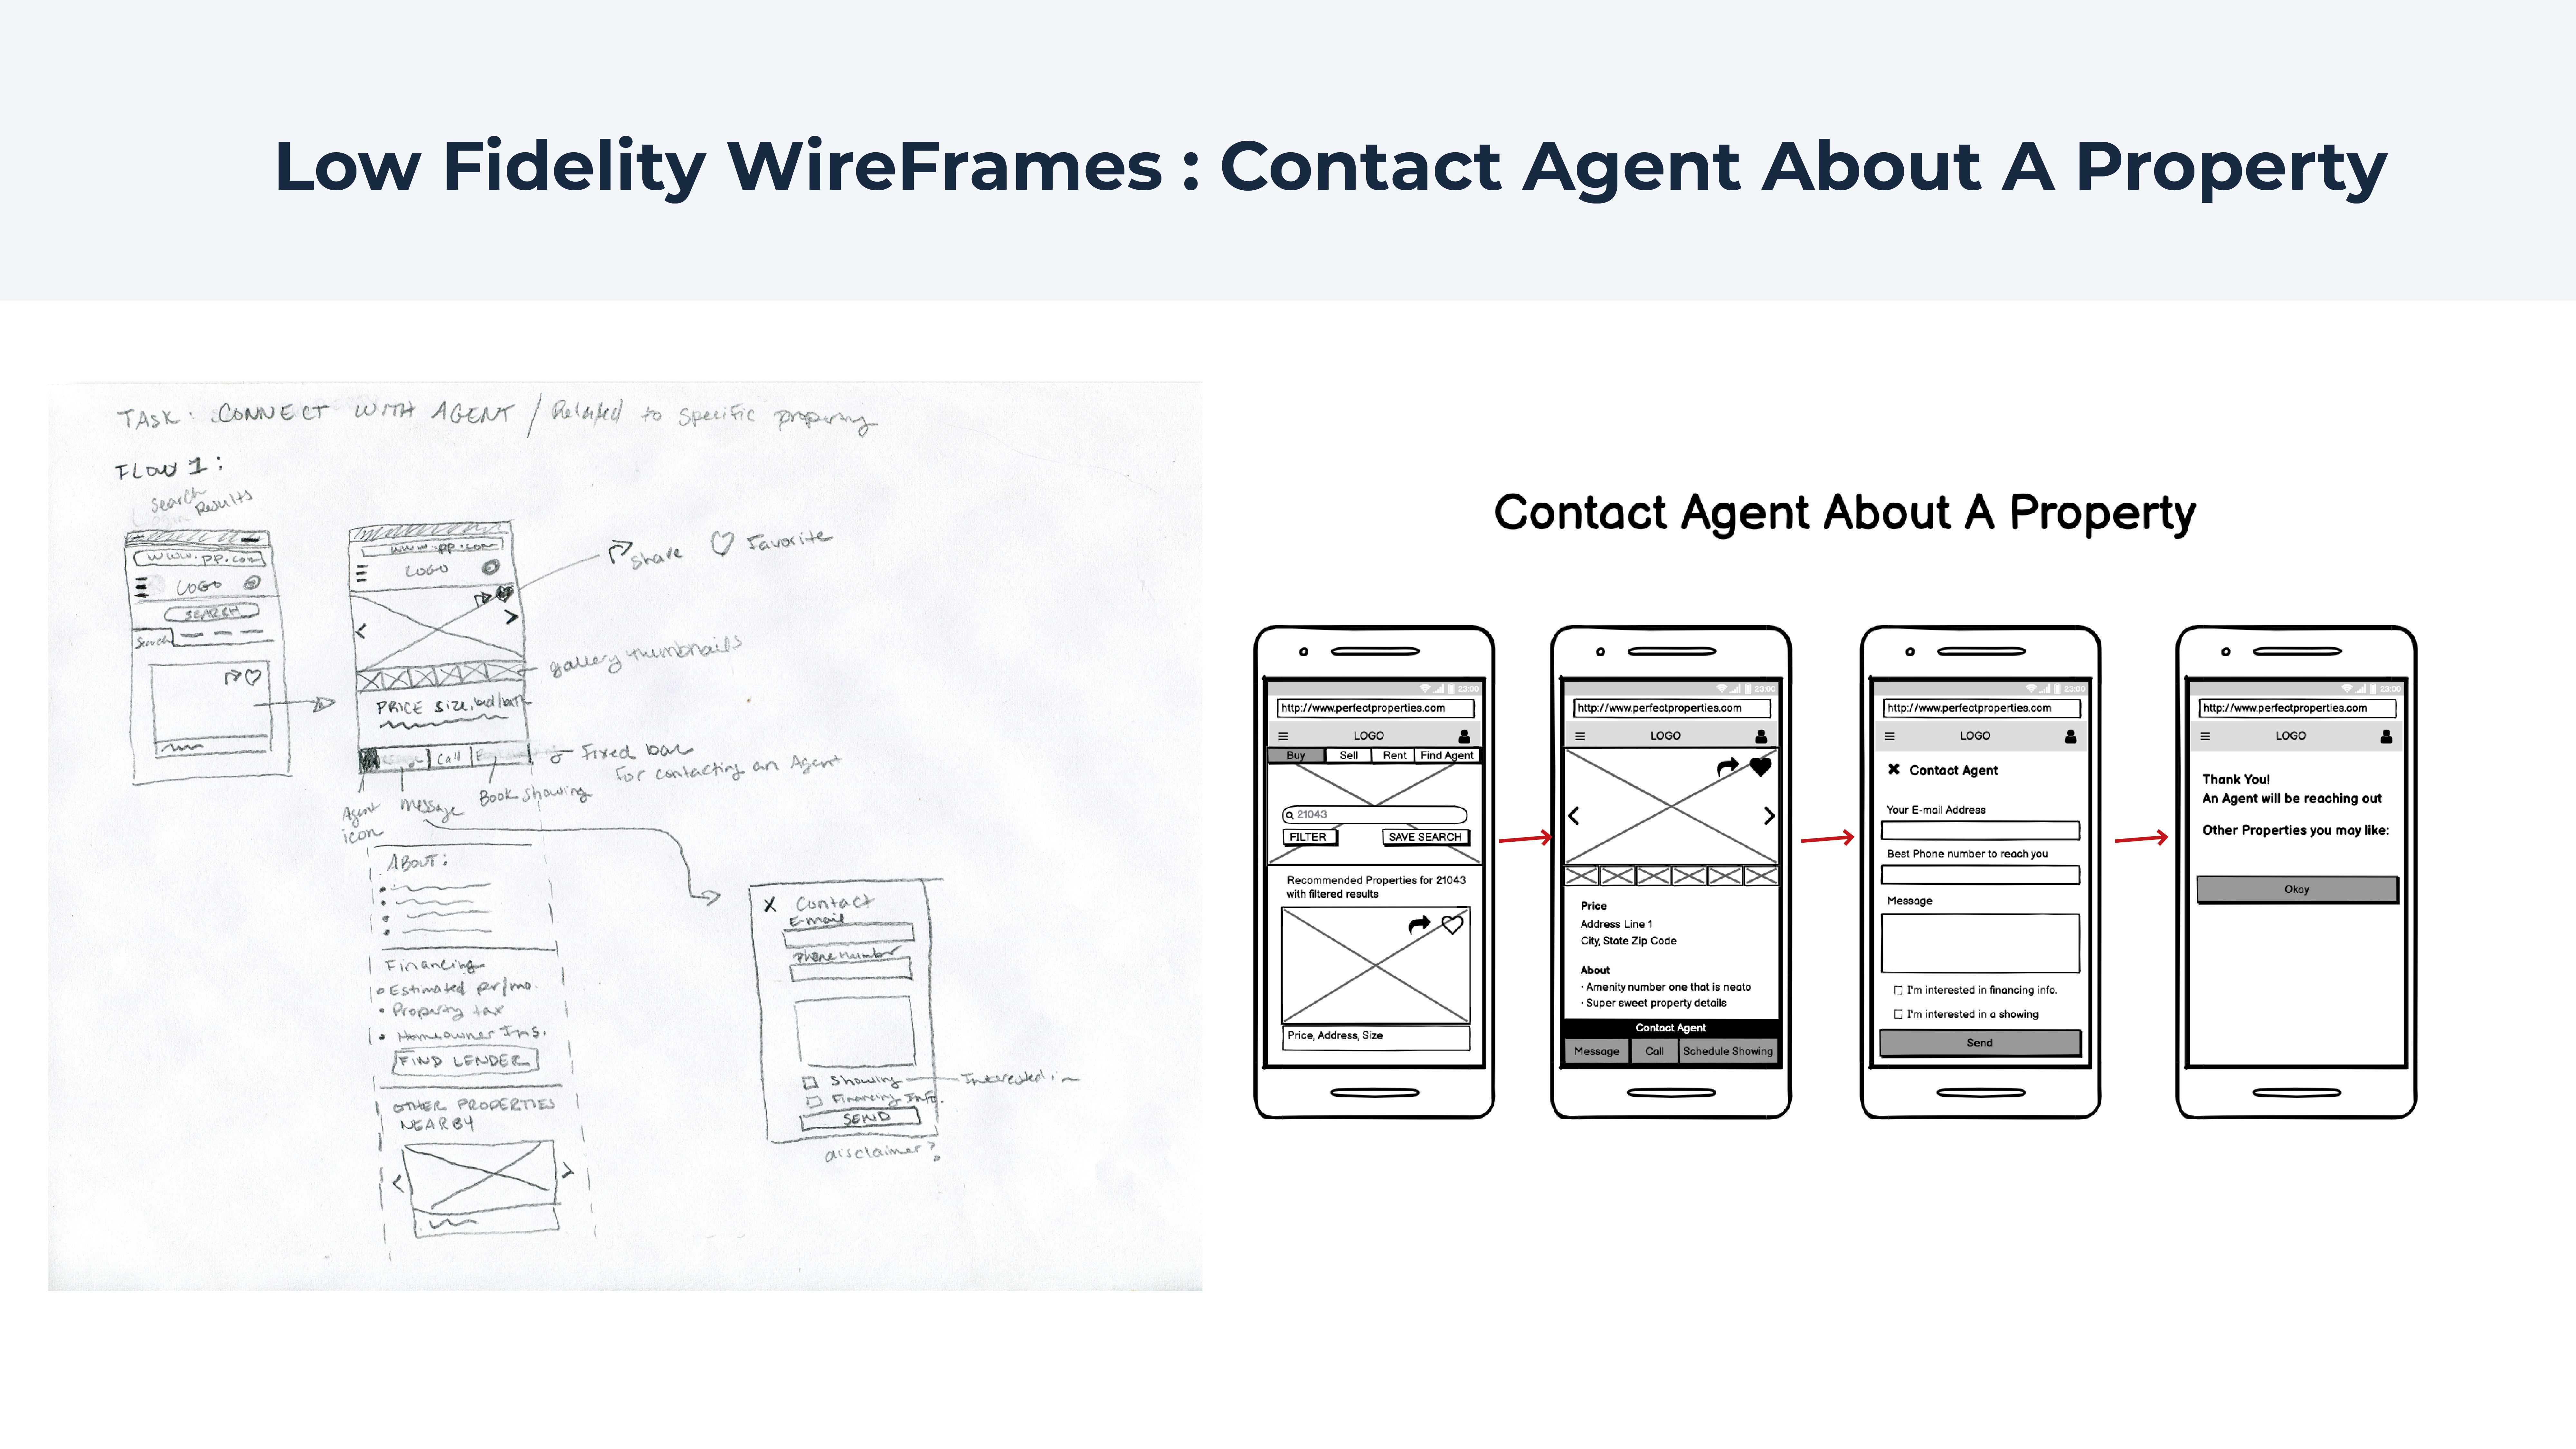 LowFi Contact Agent about property